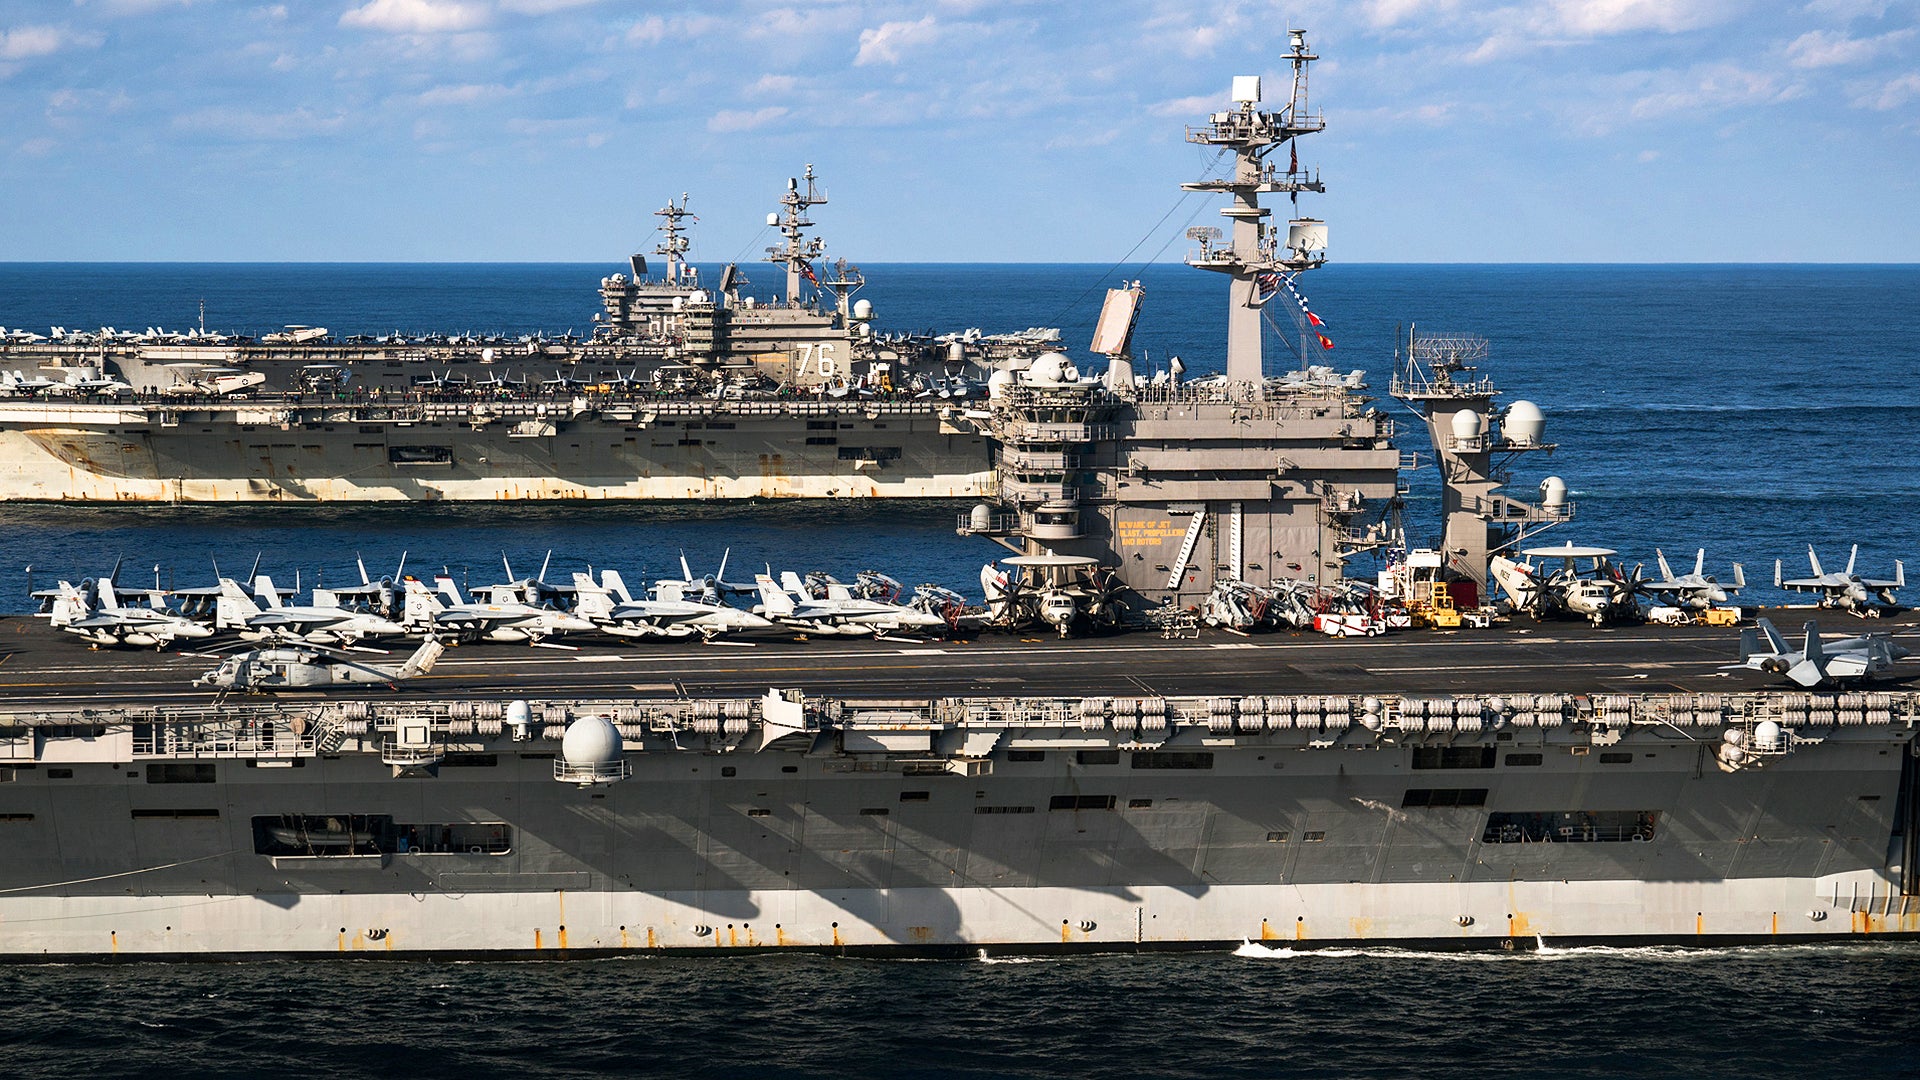 These Are The Images Of Three U.S. Supercarriers In Formation You’ve Been Waiting For